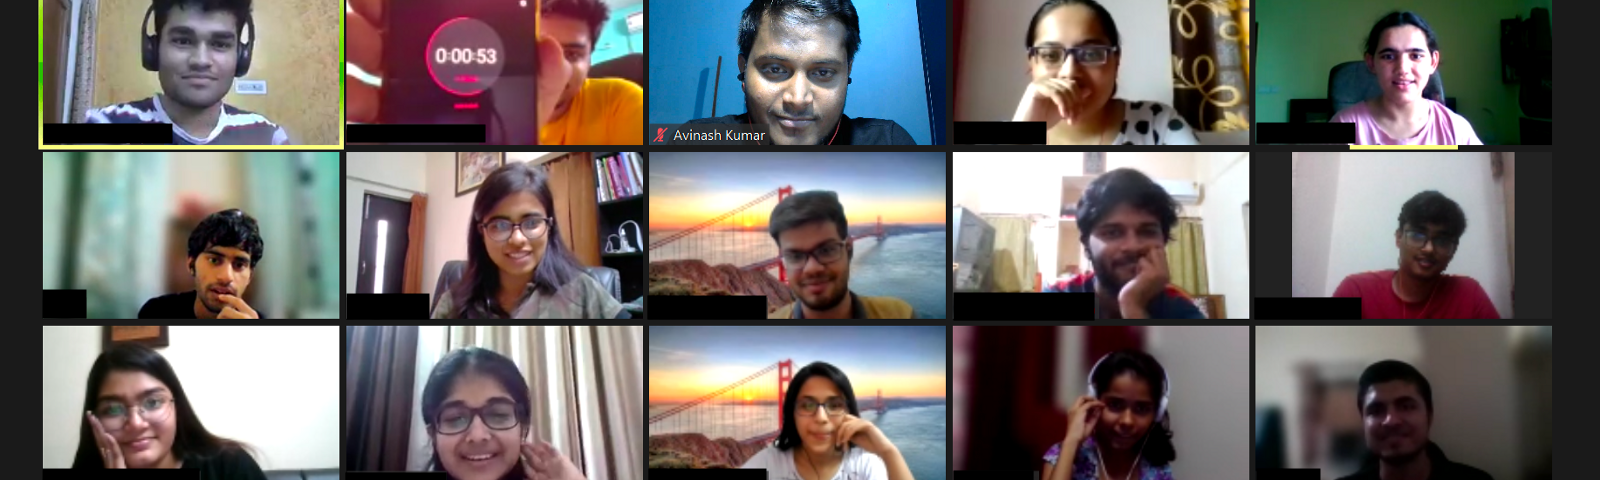 Screen capture of a Zoom call with 19 people, including the author